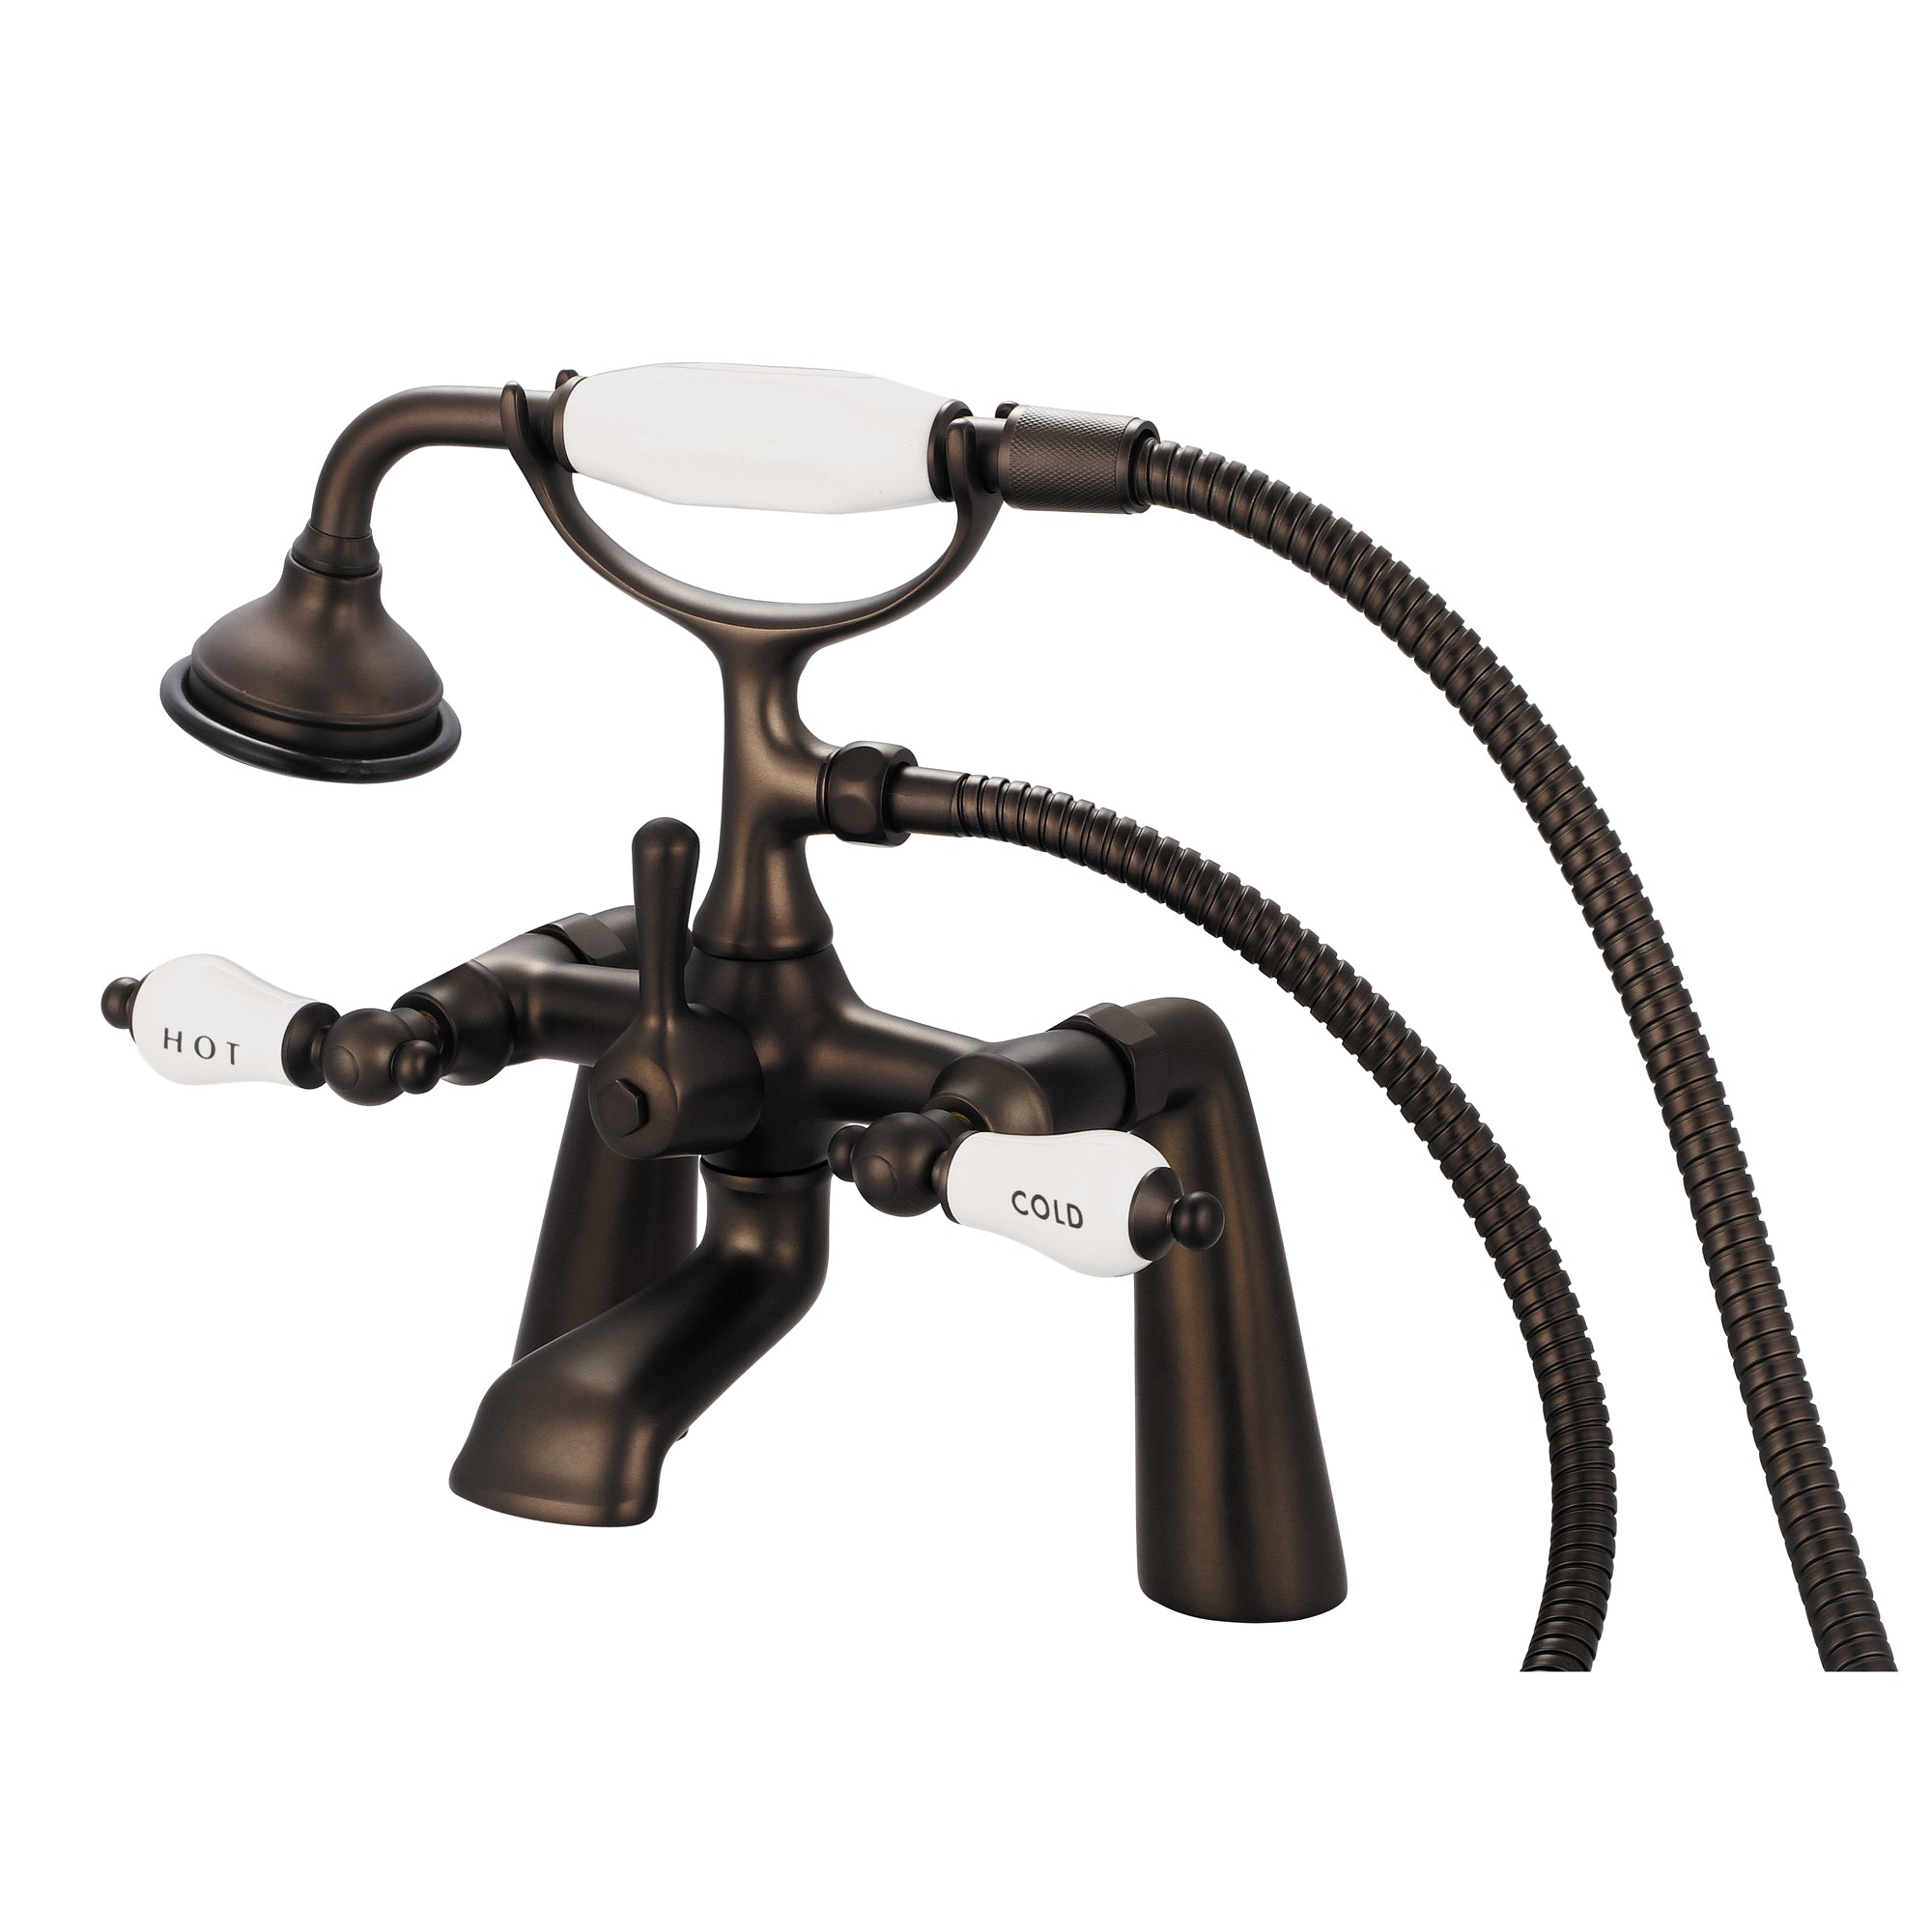 Water Creation | Vintage Classic 7 Inch Spread Deck Mount Tub Faucet With Handheld Shower in Oil-rubbed Bronze Finish Finish With Porcelain Lever Handles, Hot And Cold Labels Included | F6-0003-03-CL